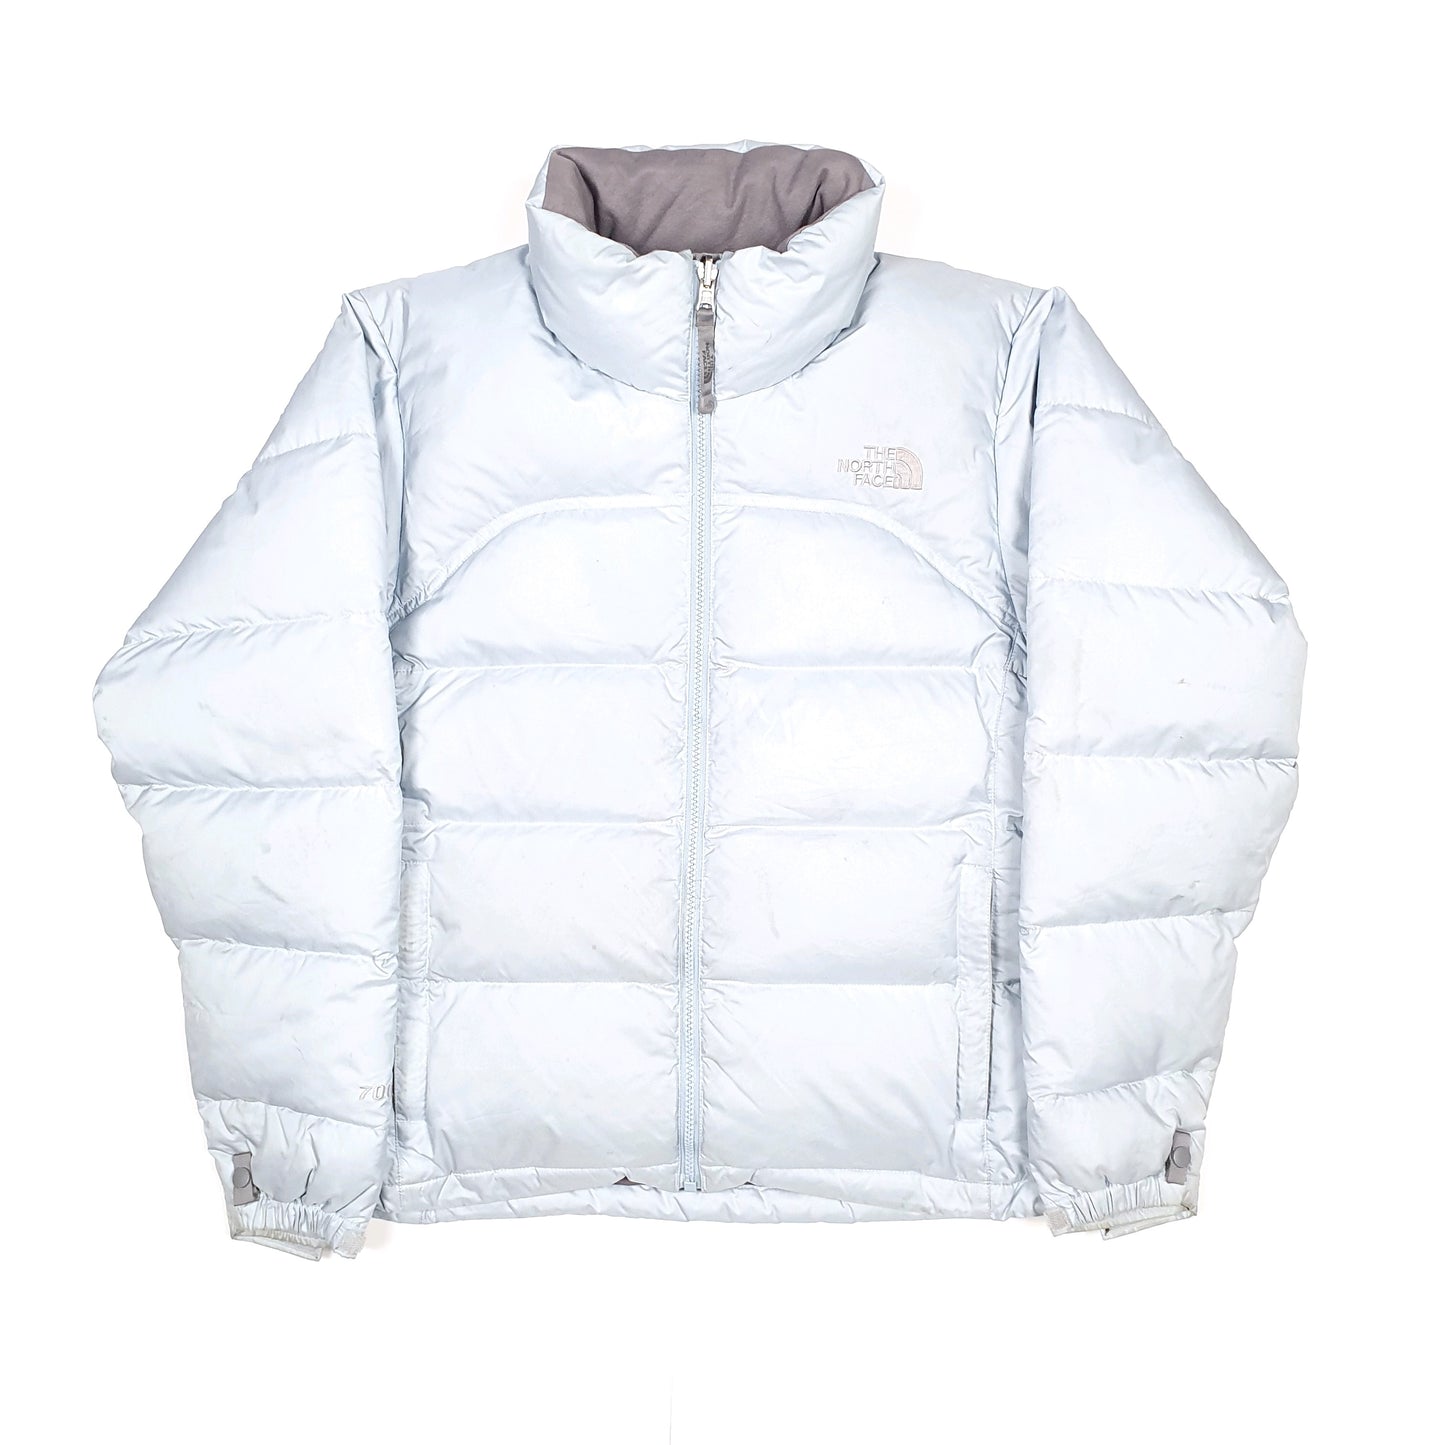 Blue The North Face Puffer Jacket Coat